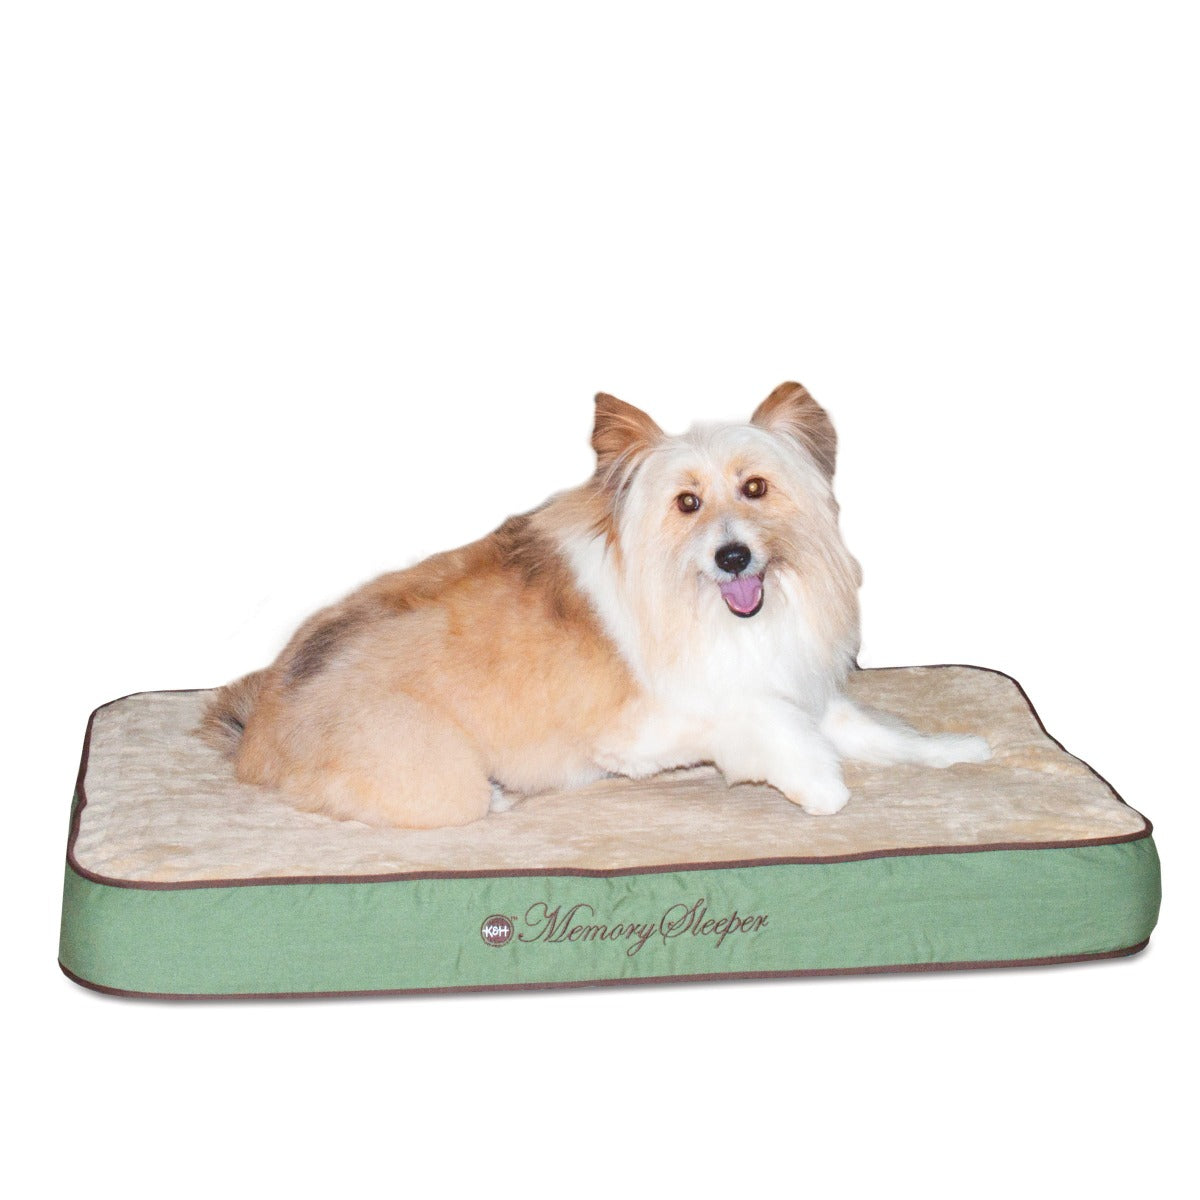 K&H Pet Products Memory Sleeper Pet Bed